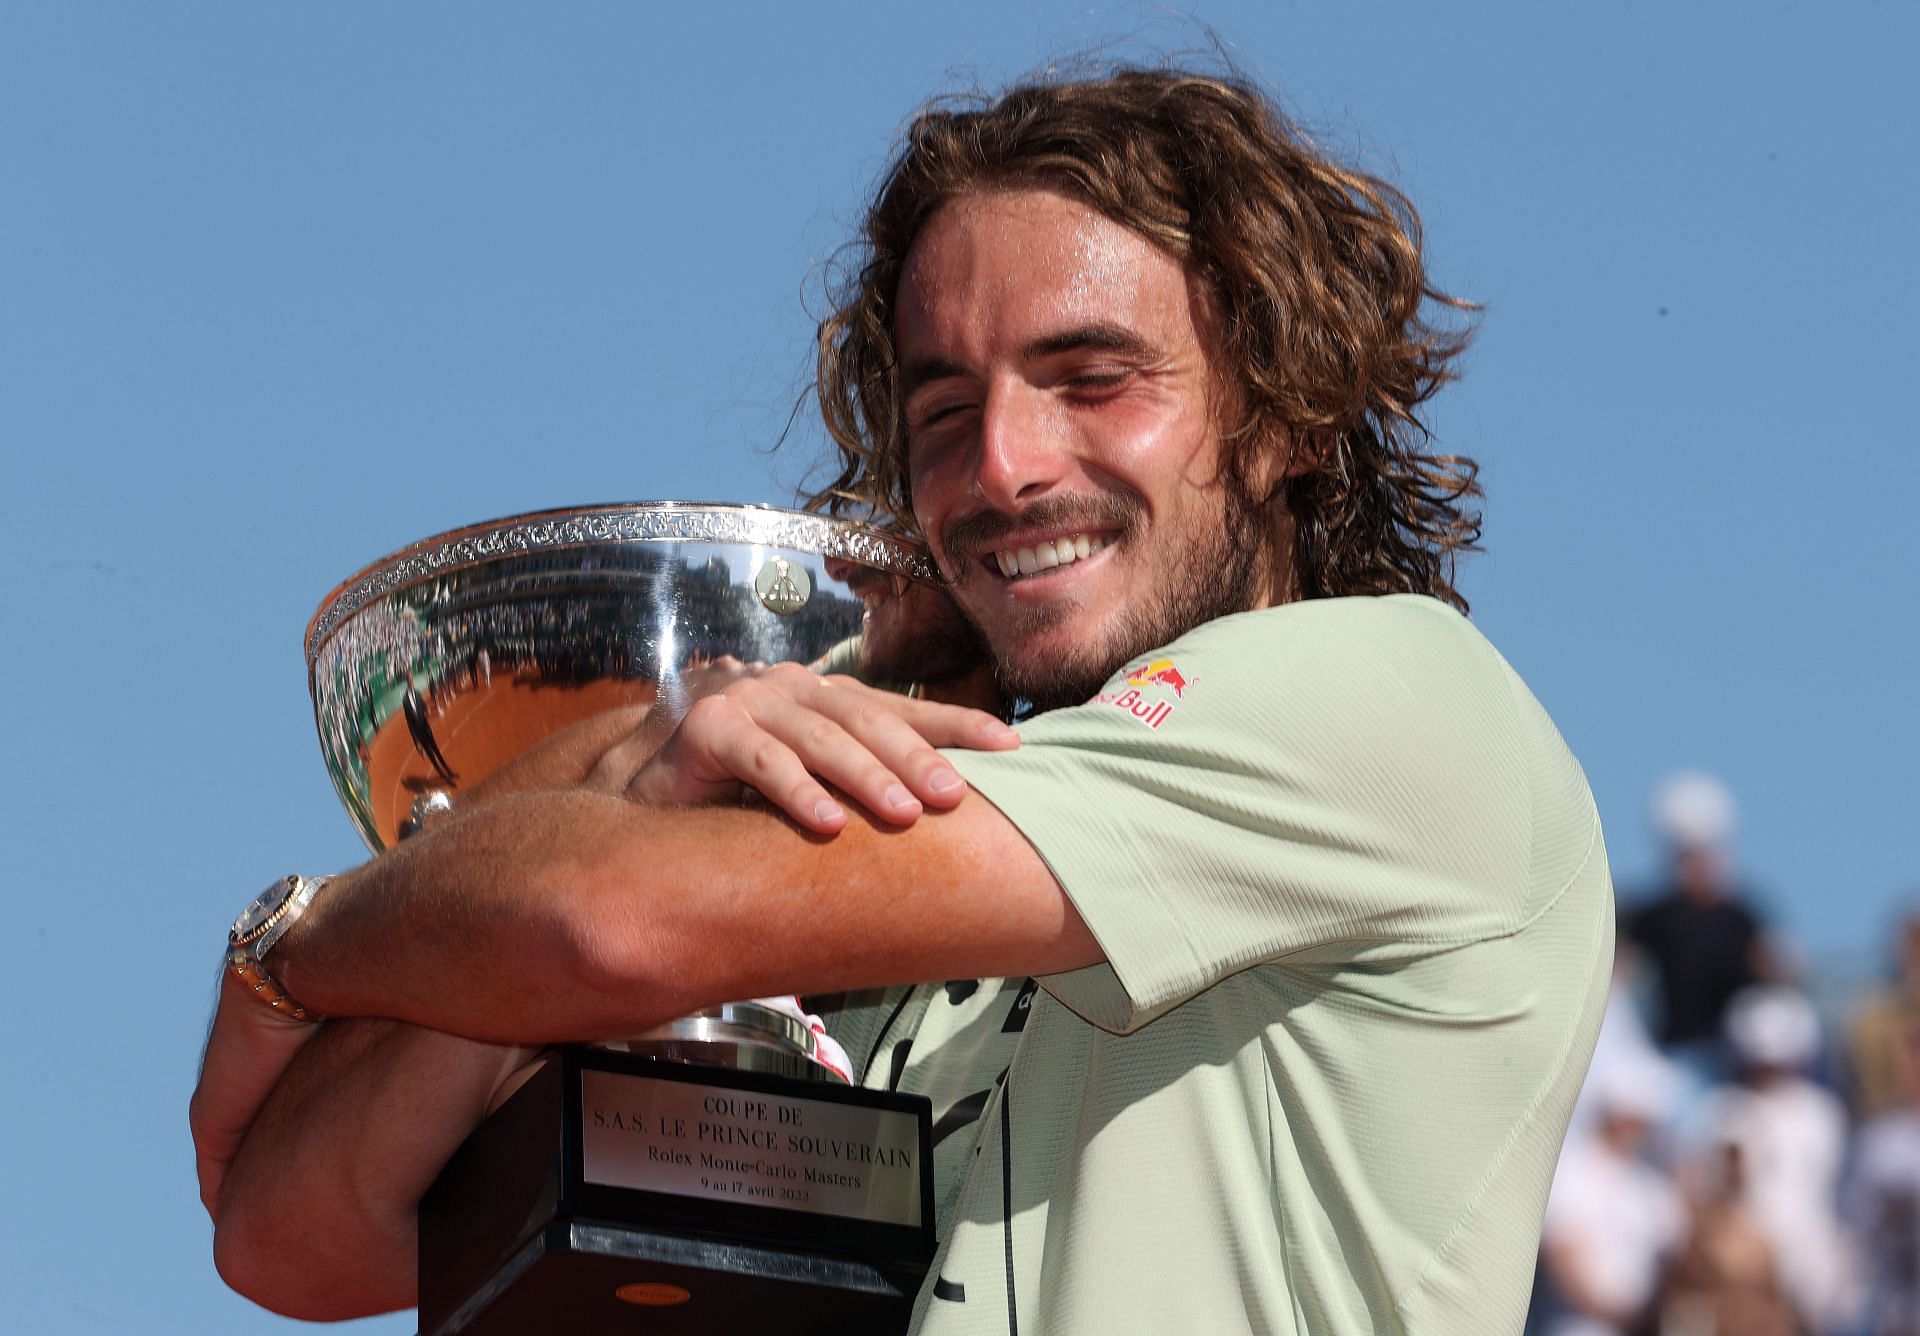 Stefanos Tsitsipas was a finalist at the French Open last year.